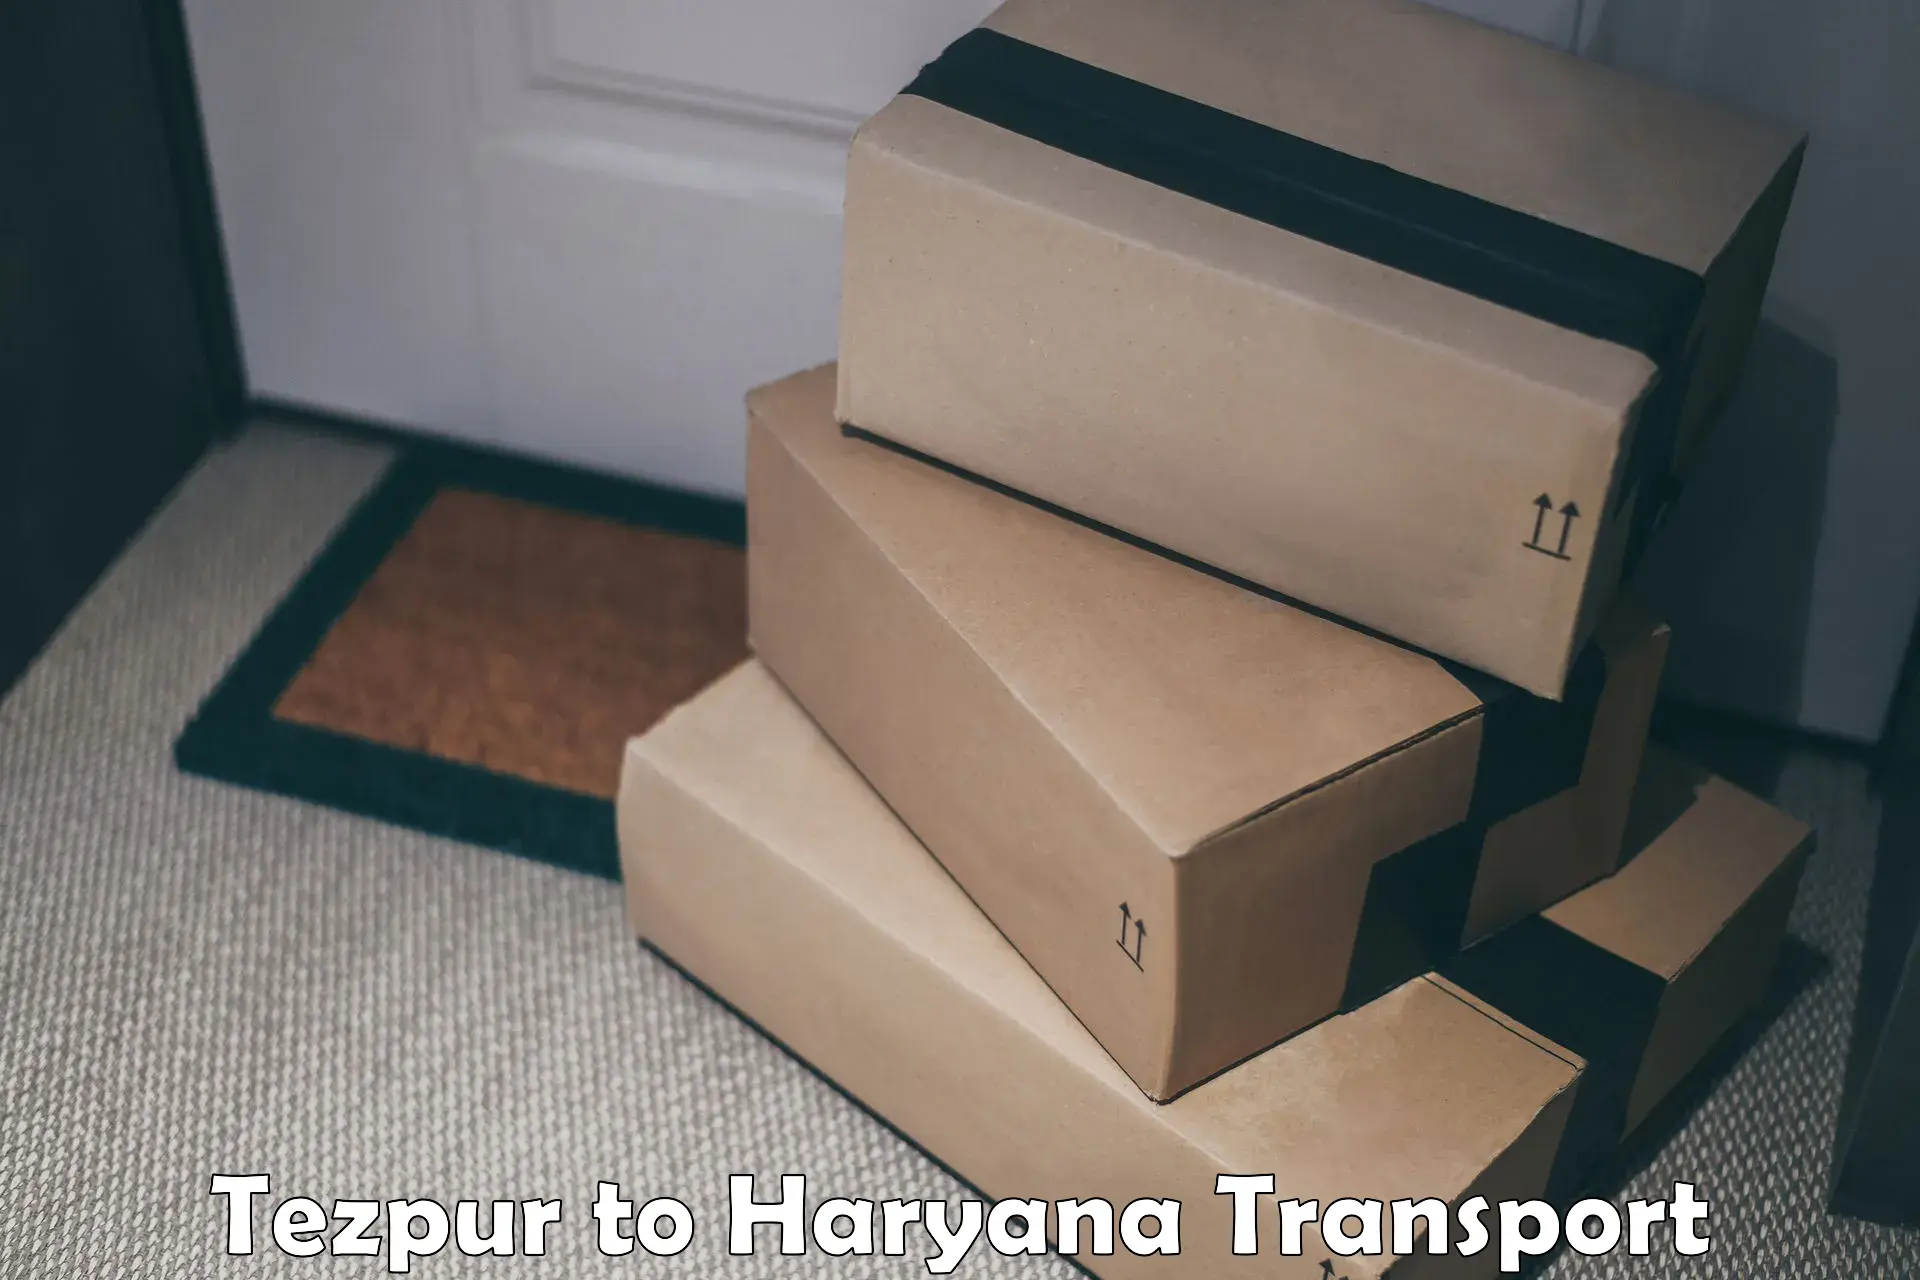 Goods delivery service Tezpur to Gurgaon